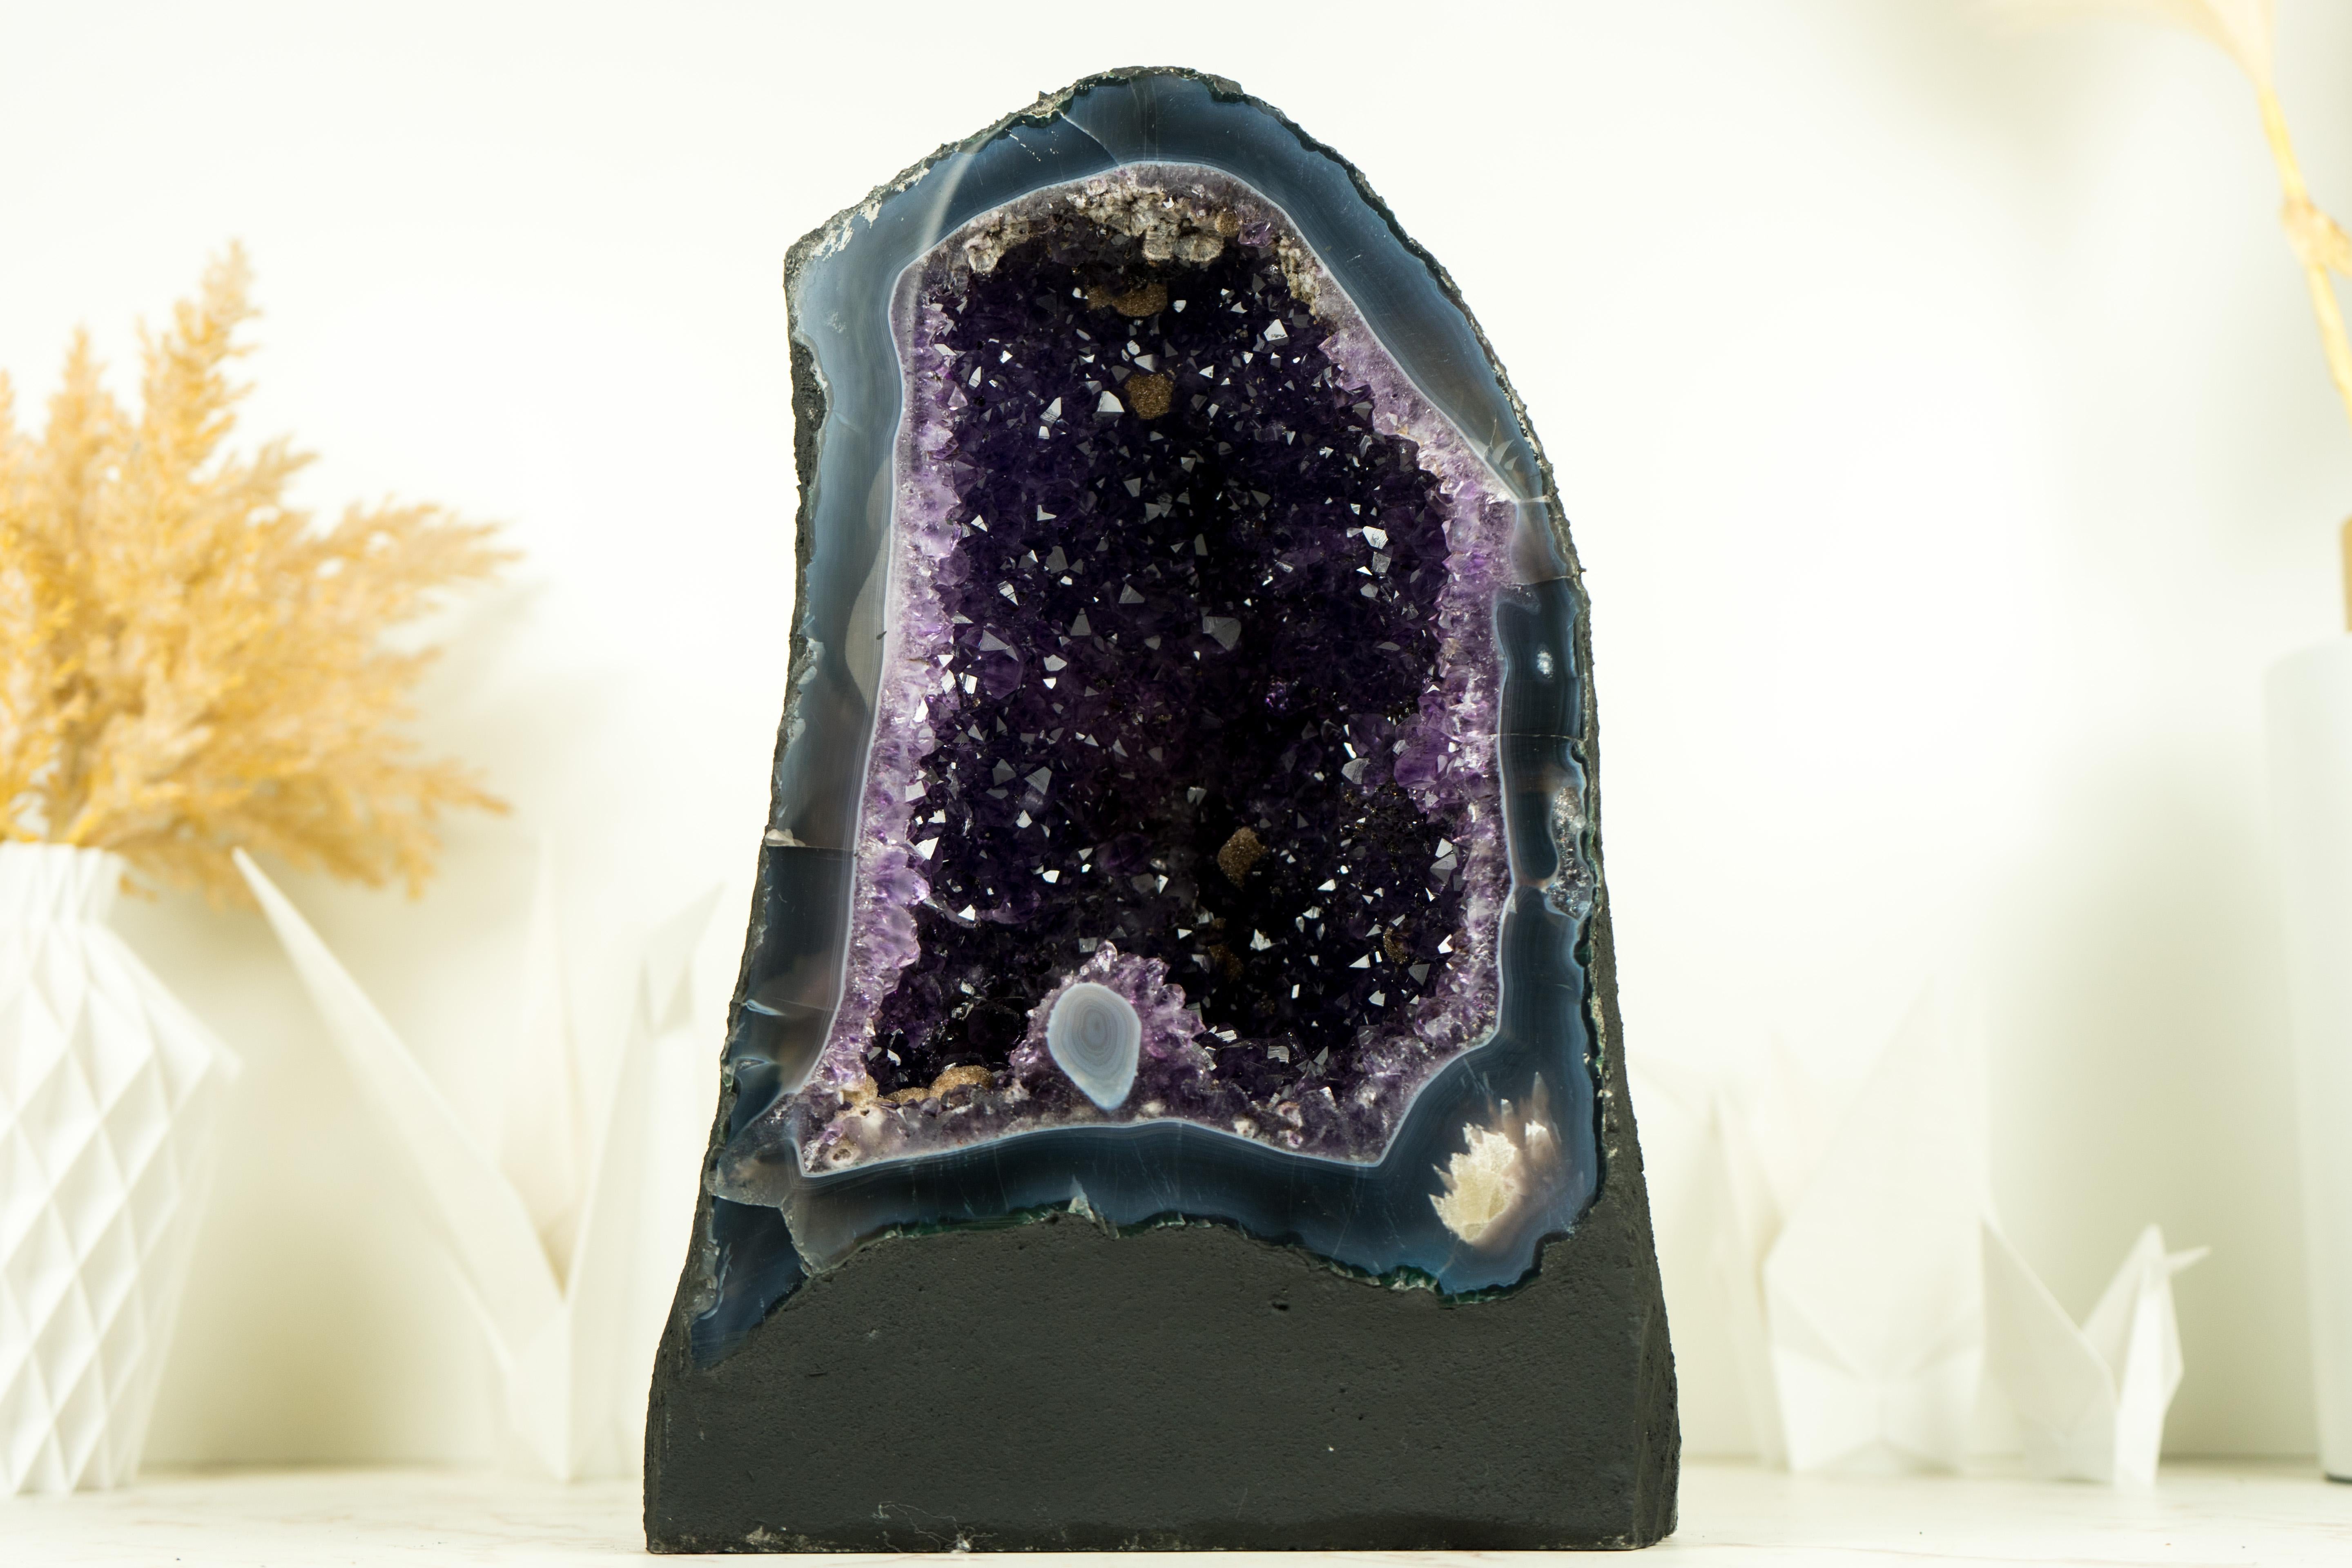 With a gorgeous natural formation and bringing unique beauty, this amethyst with agate geode is a natural form of art to display as a focal point in your space or a beautiful natural sculpture on your table.

The Amethyst druzy is considered to be